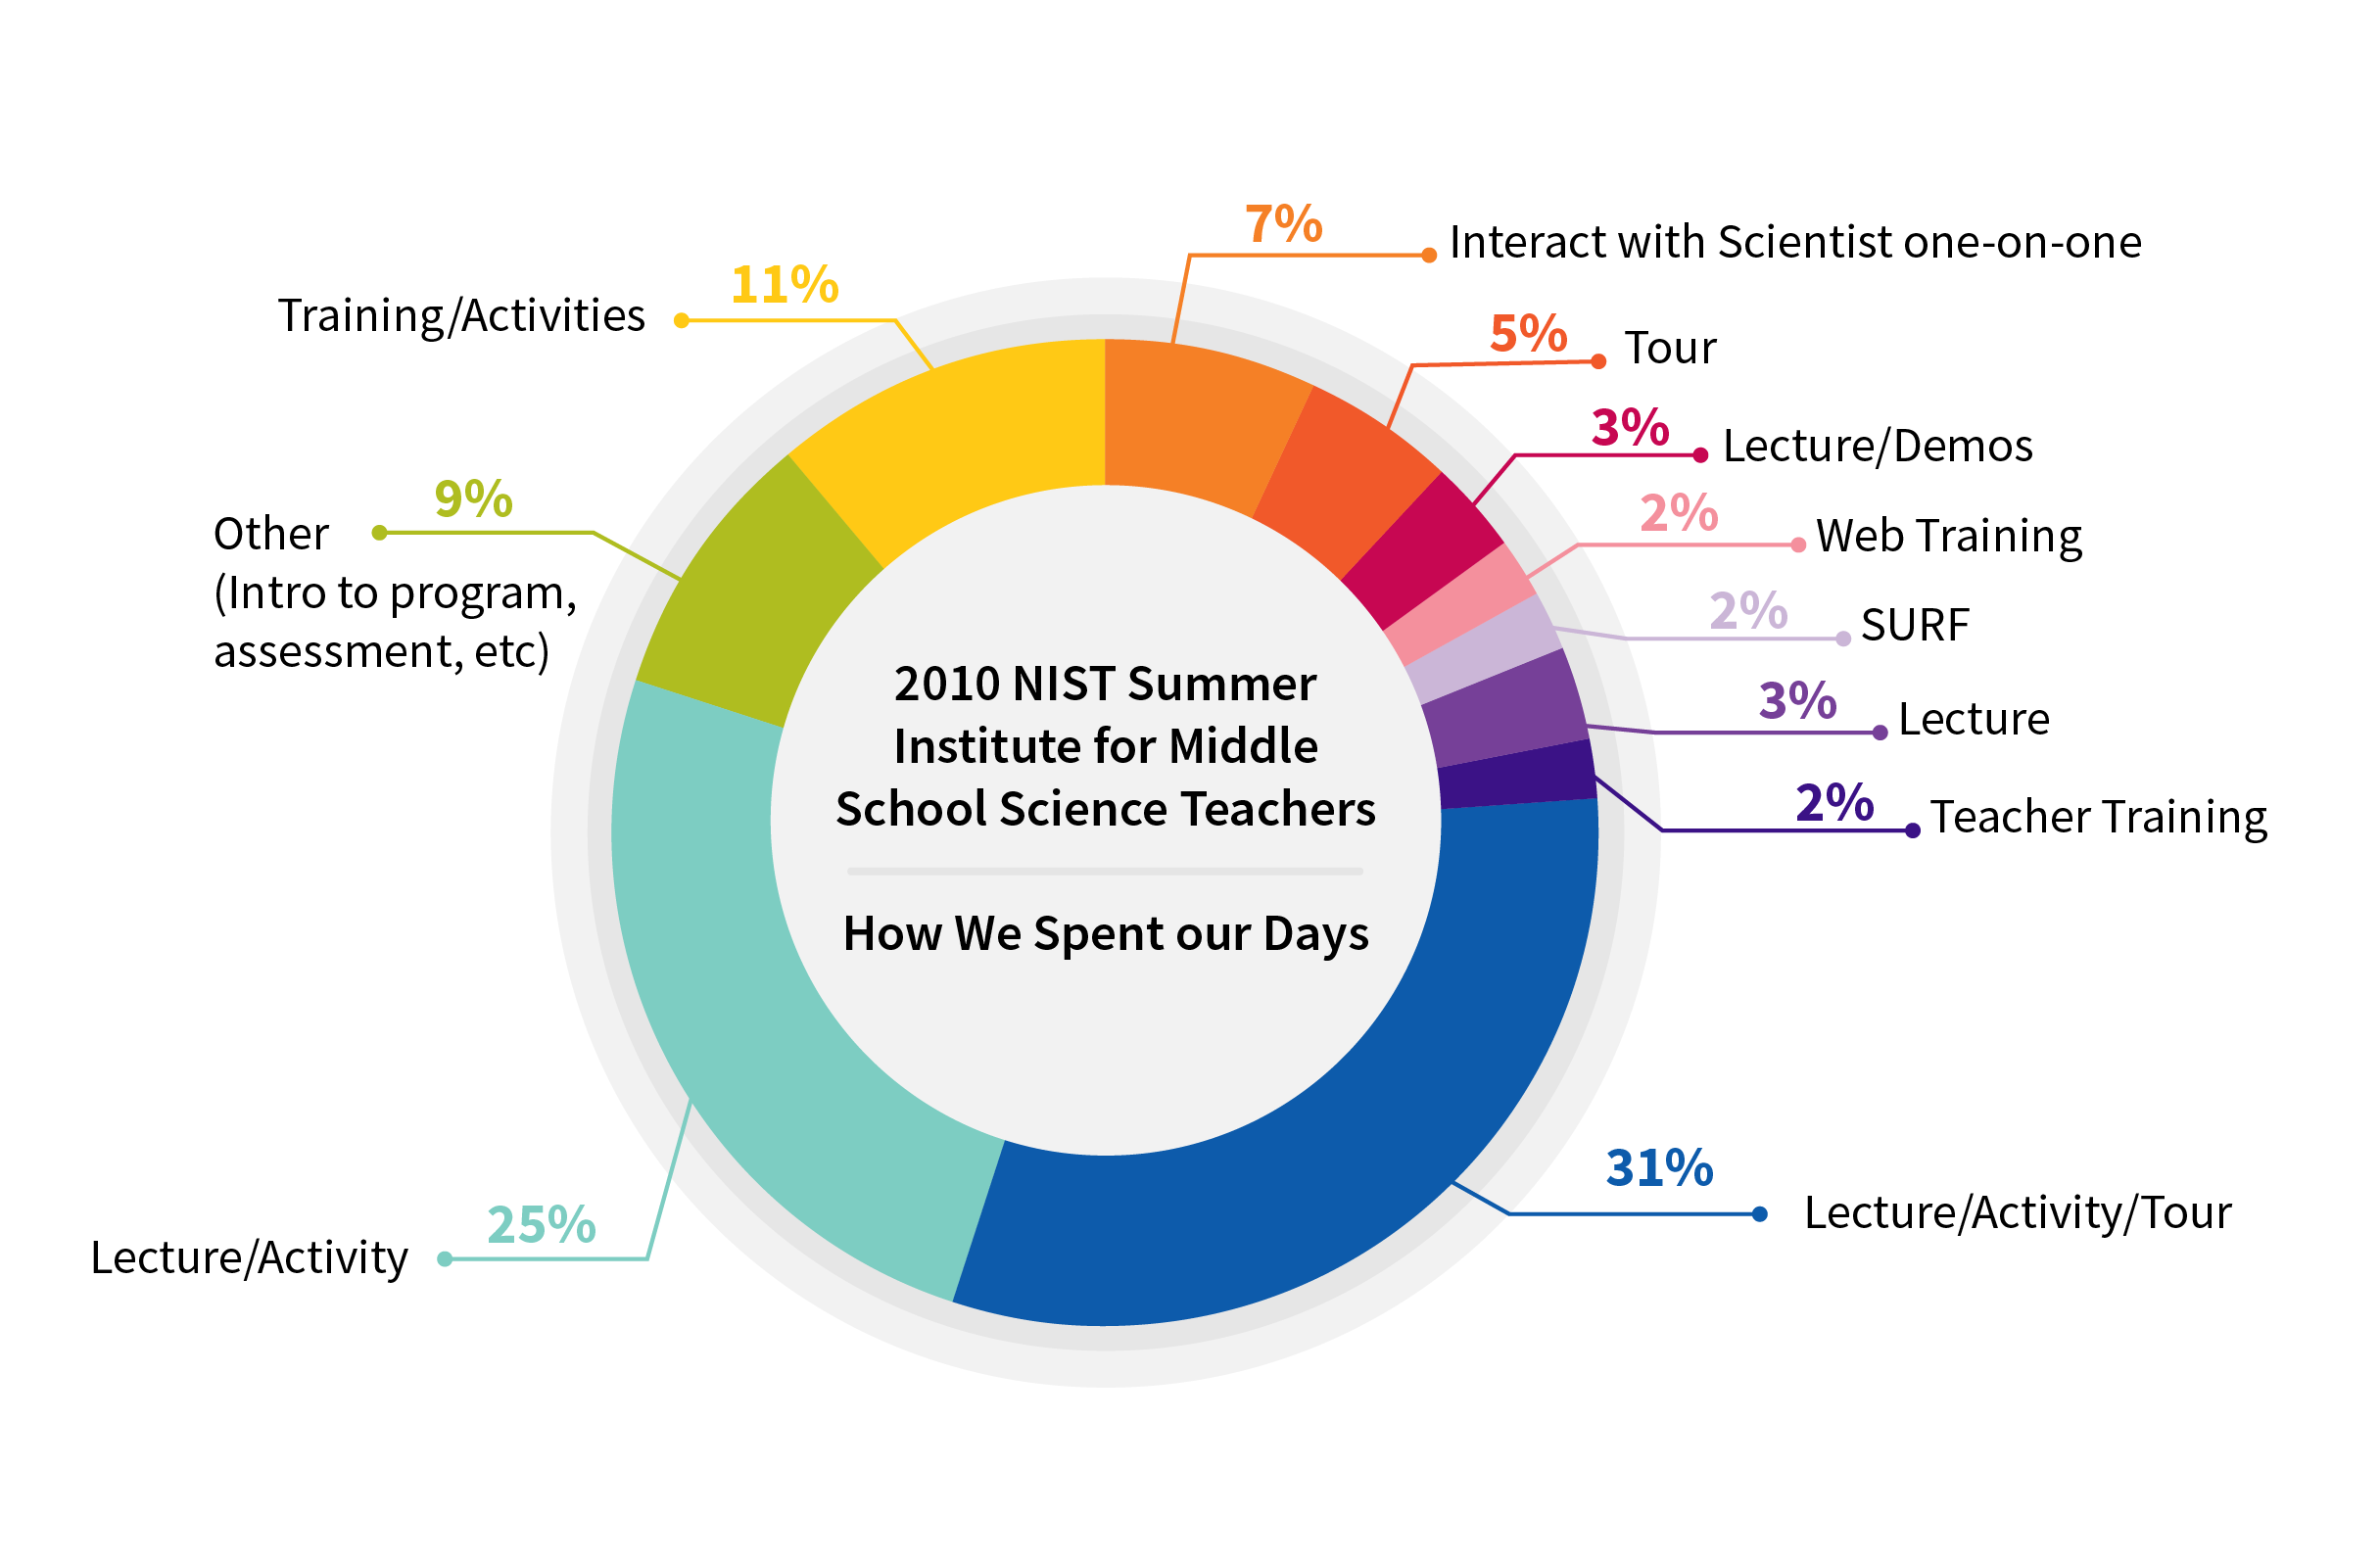 Display data using a pie graph - Studyladder Interactive Learning